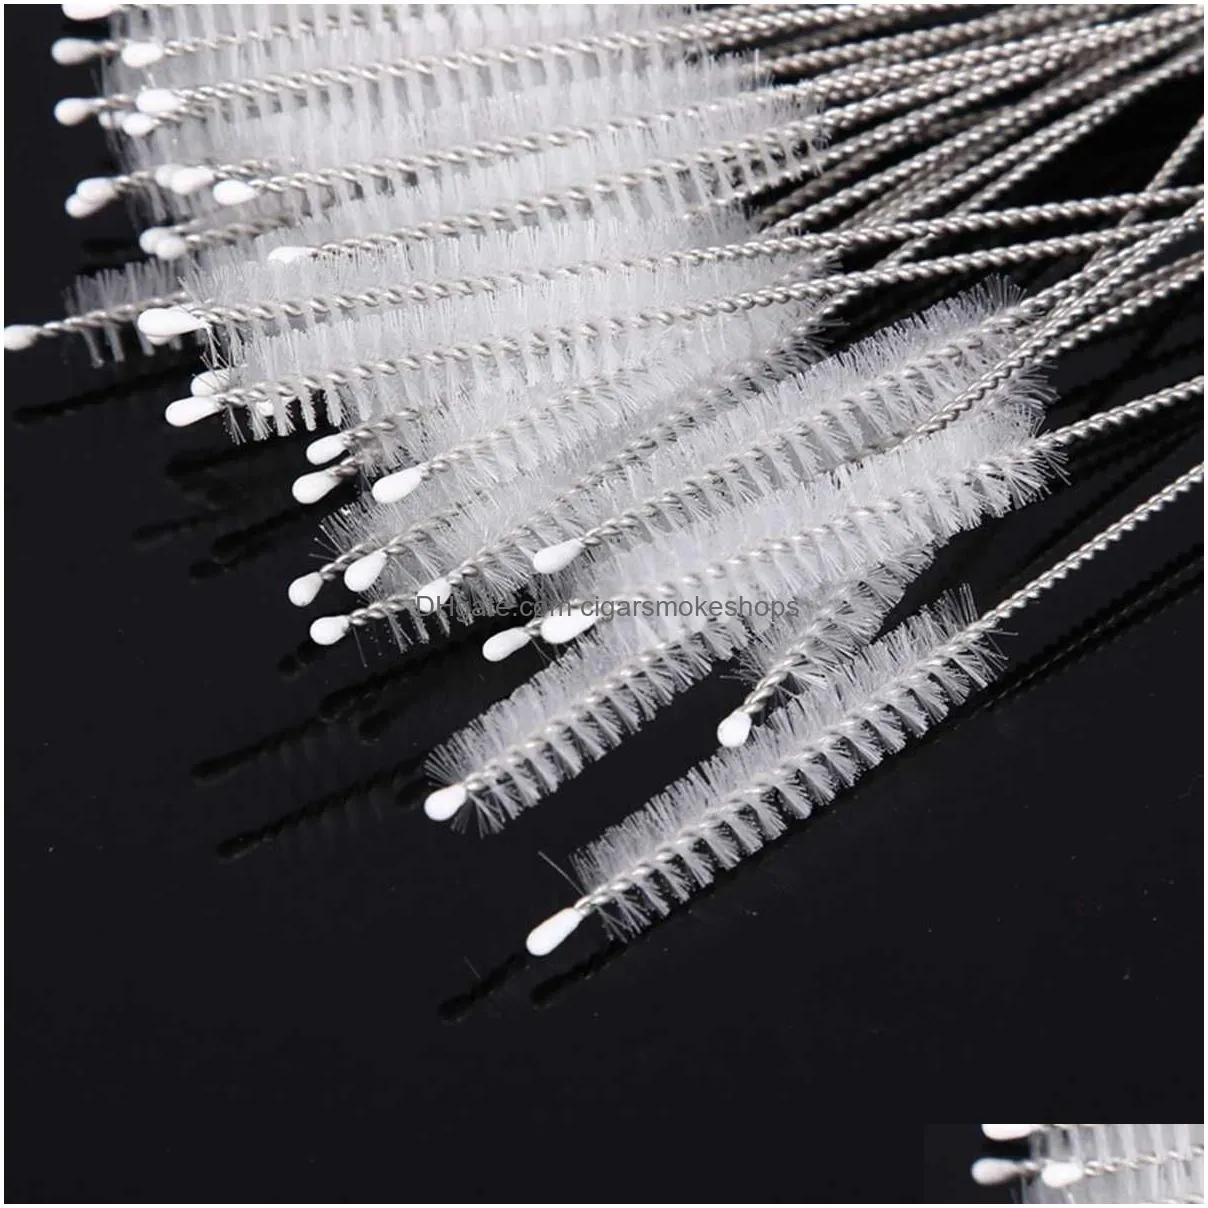 new 10pcs drinking straw cleaning brush kit straw tube pipe cleaner nylon stainless steel long handle cleaning brushes for straws